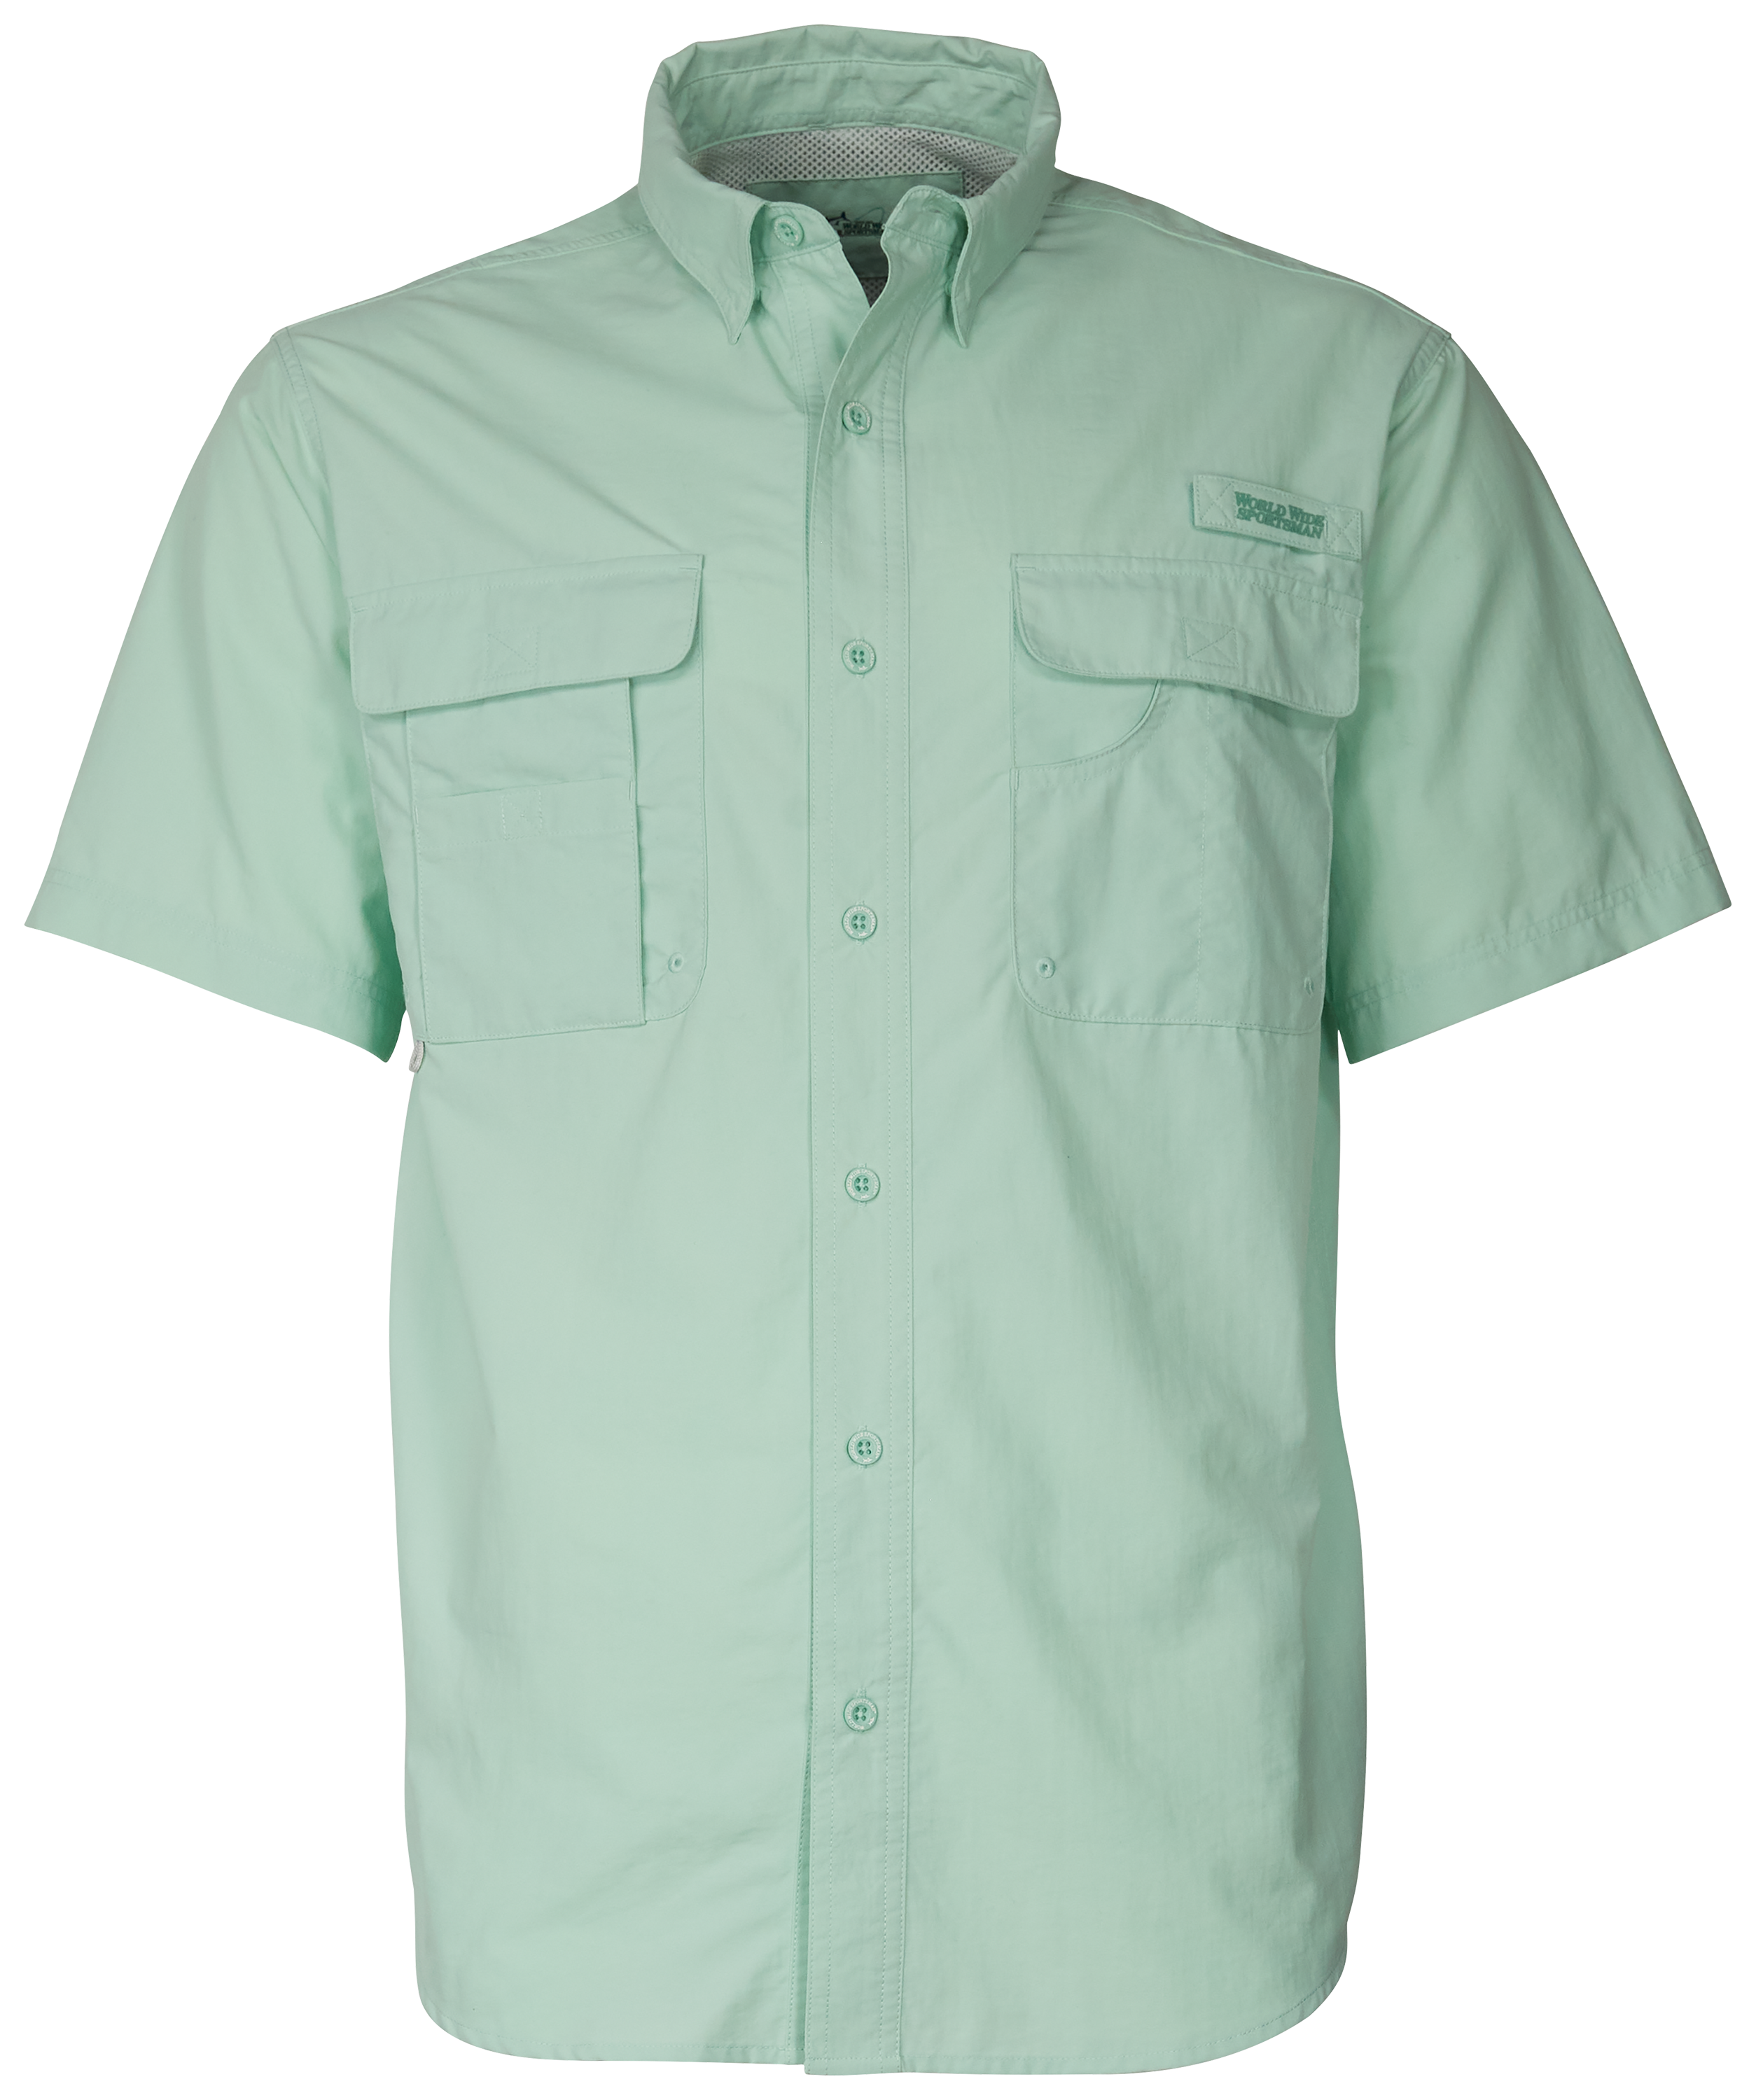 World Wide Sportsman Recycled-Nylon Angler 2.0 Short-Sleeve Button-Down Shirt for Men - Lichen - L